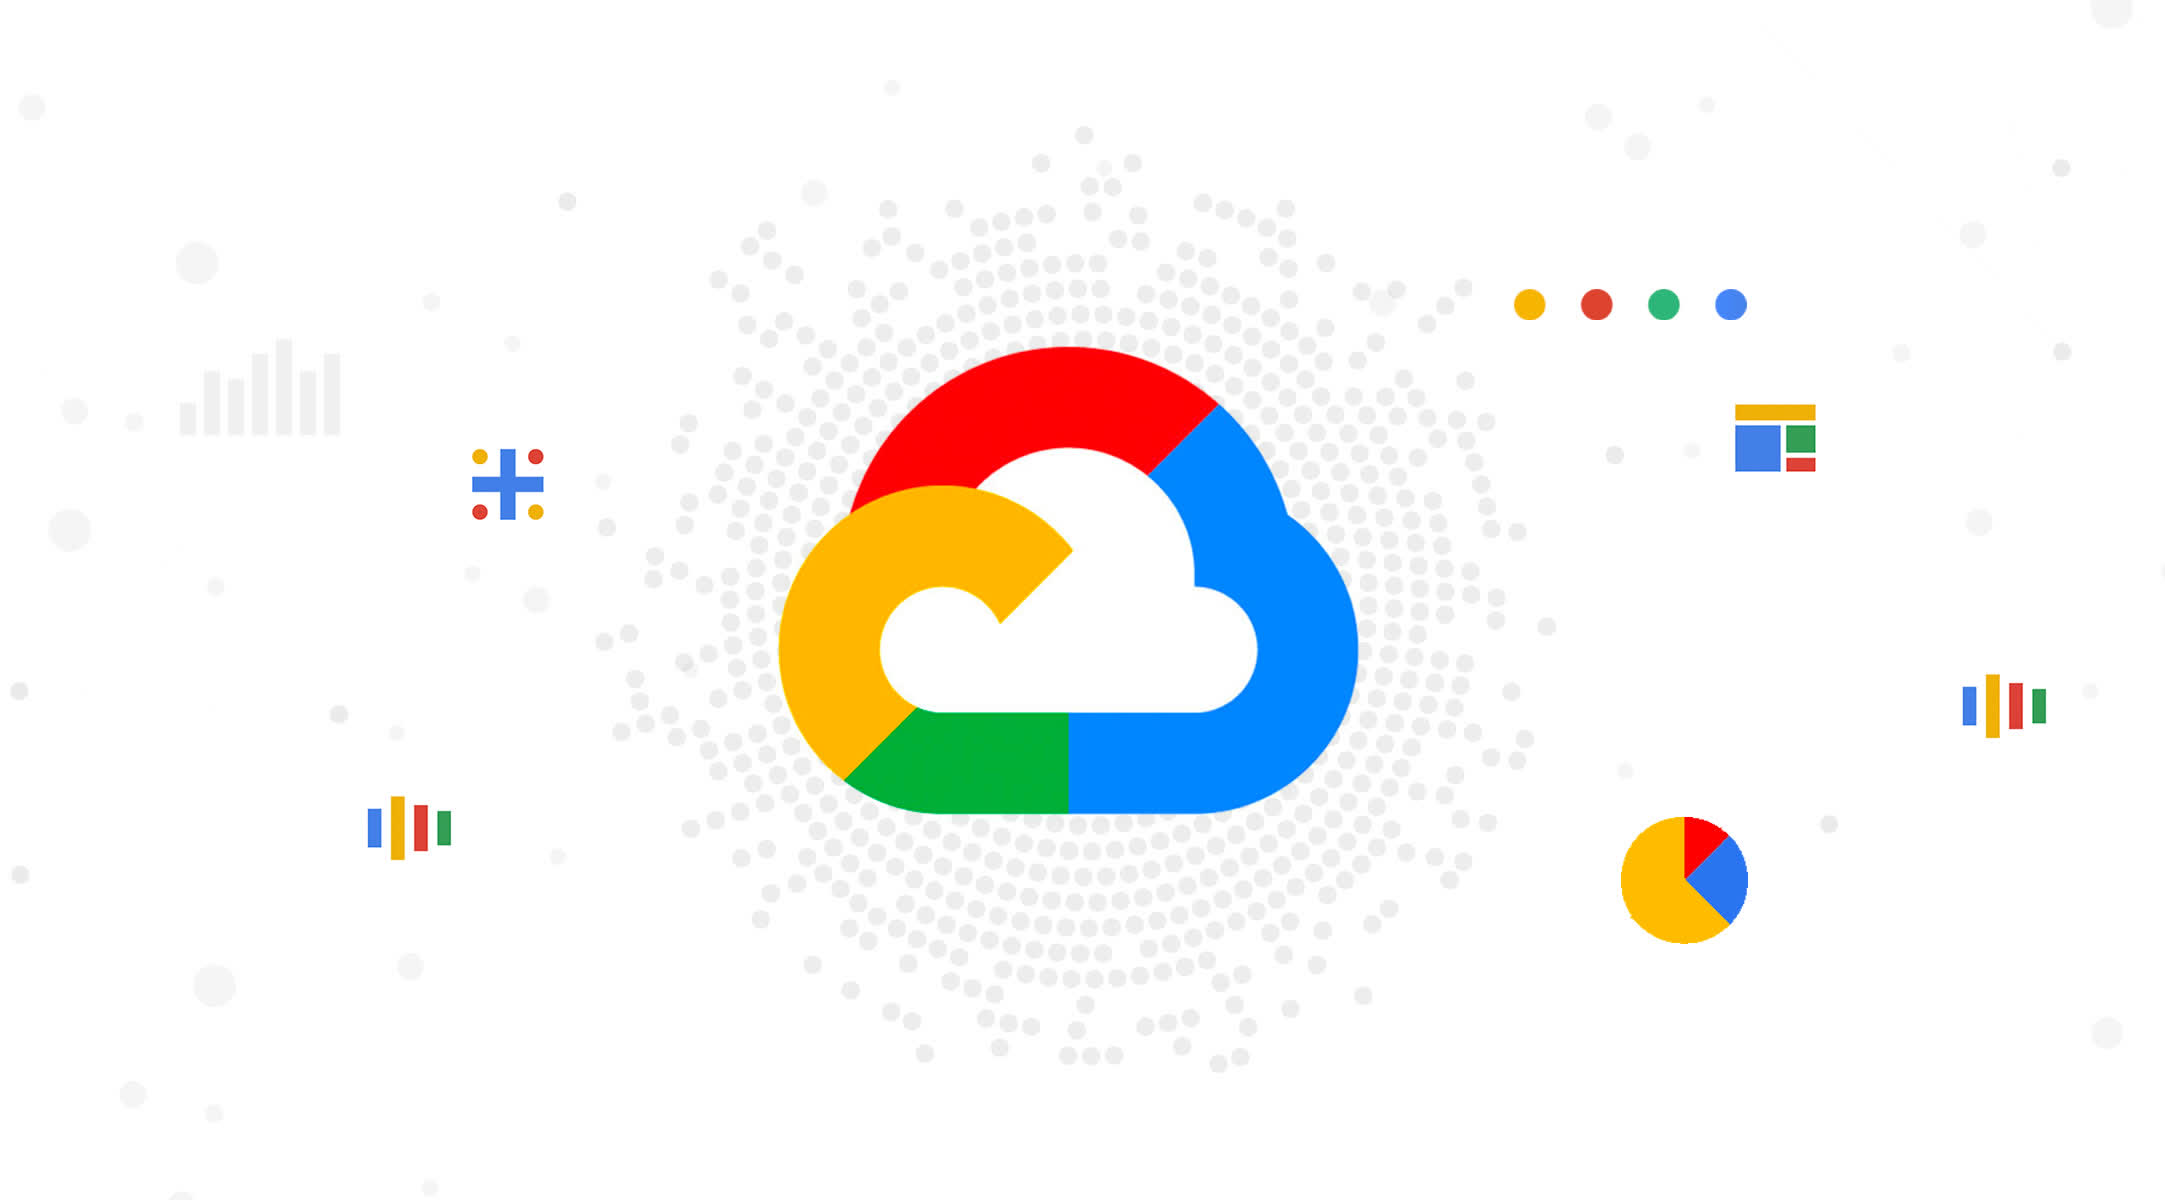 Google unveils a host of open data and AI advancements at Cloud Next